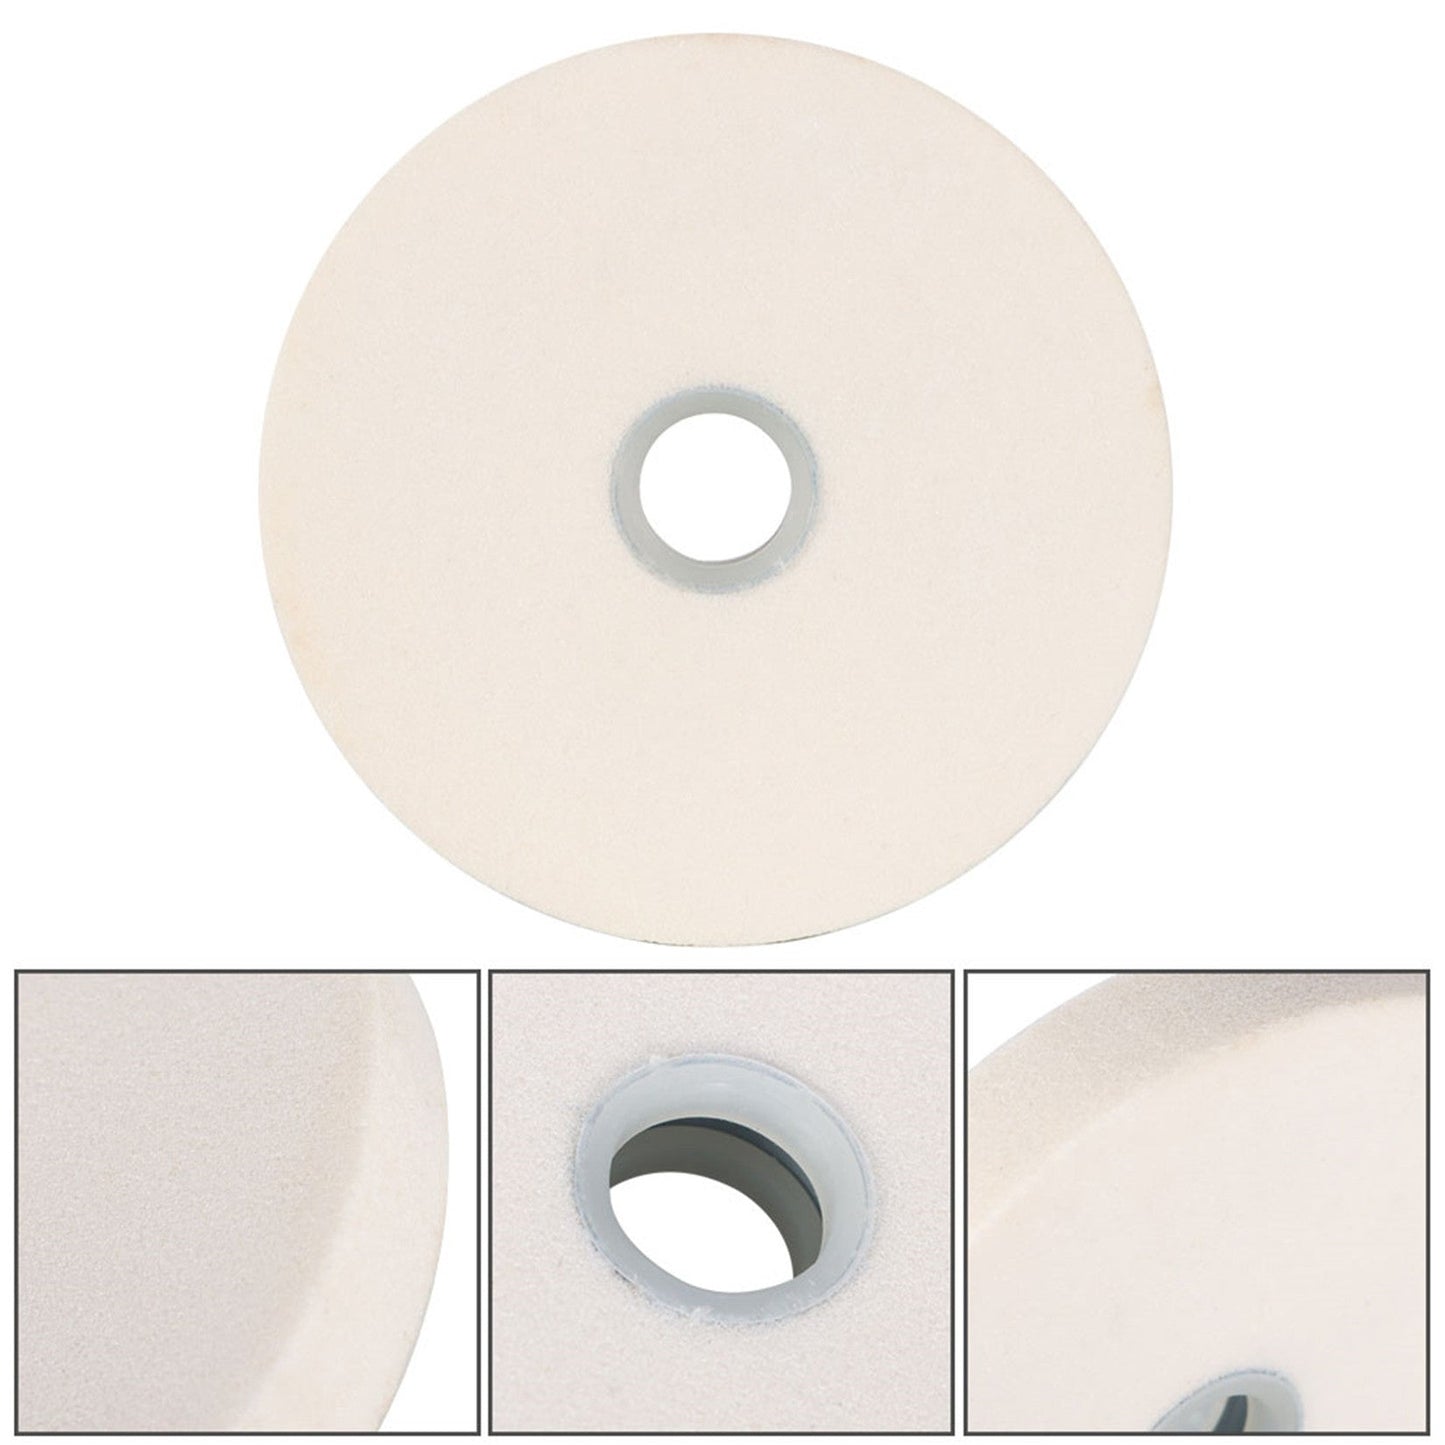 6" x 3/4" x 1" Grinding Wheel White Aluminum Oxide Cutting Tool 60 Grit FINDMALLPARTS